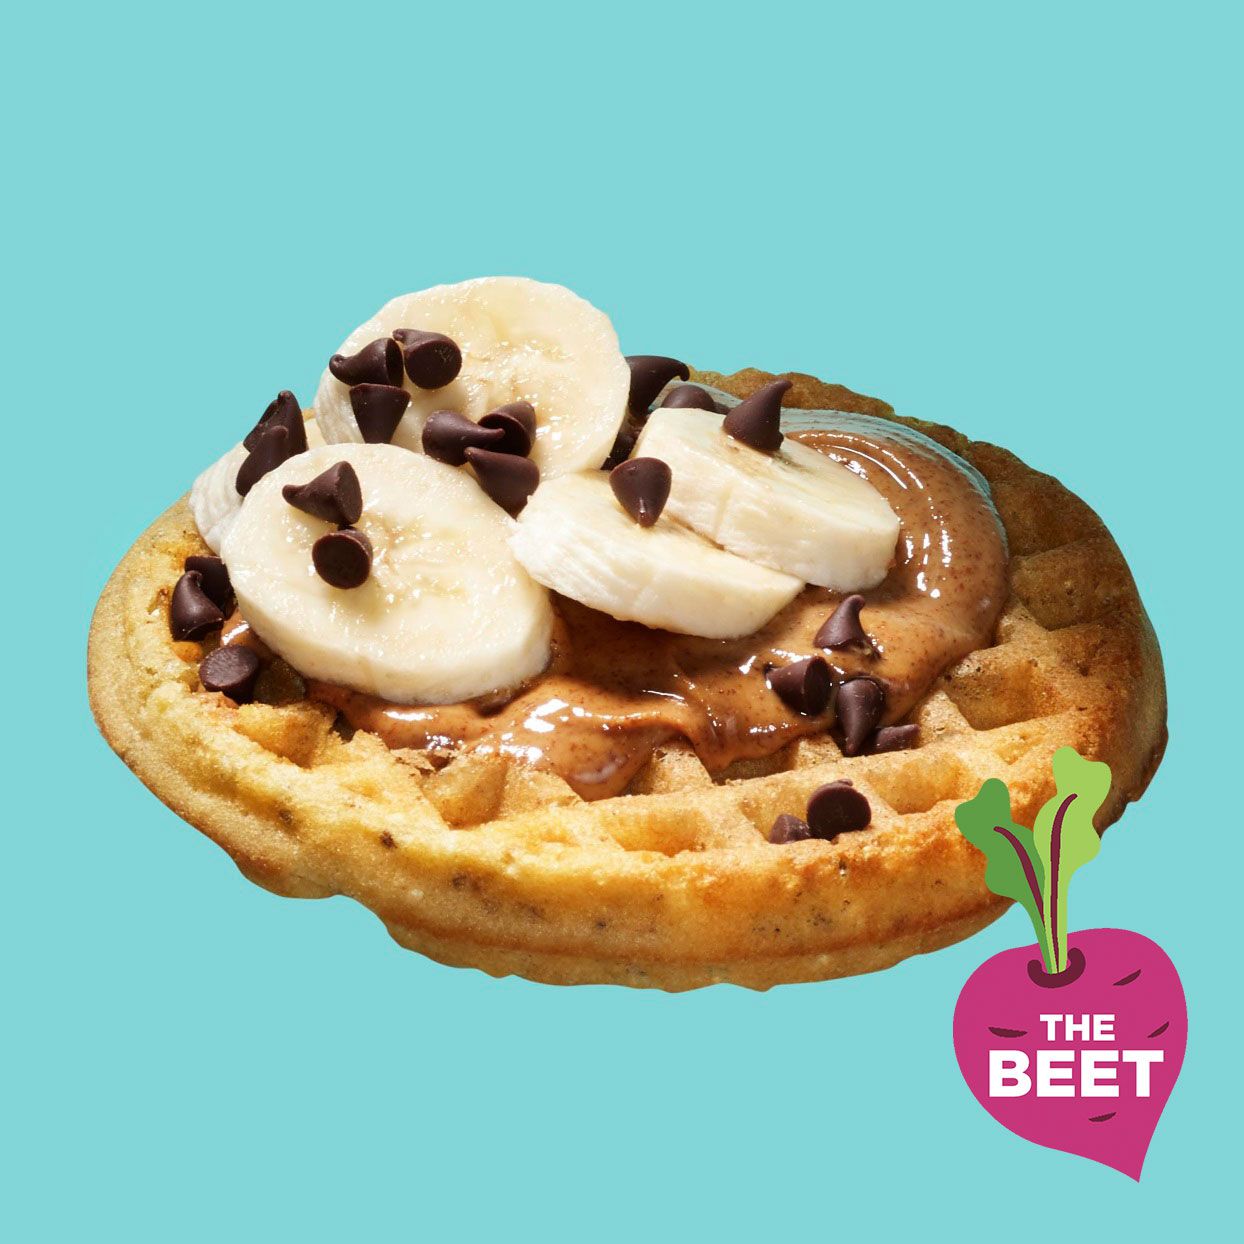 frozen waffle with peanut butter banana and chocolate chips on blue background with the beet logo